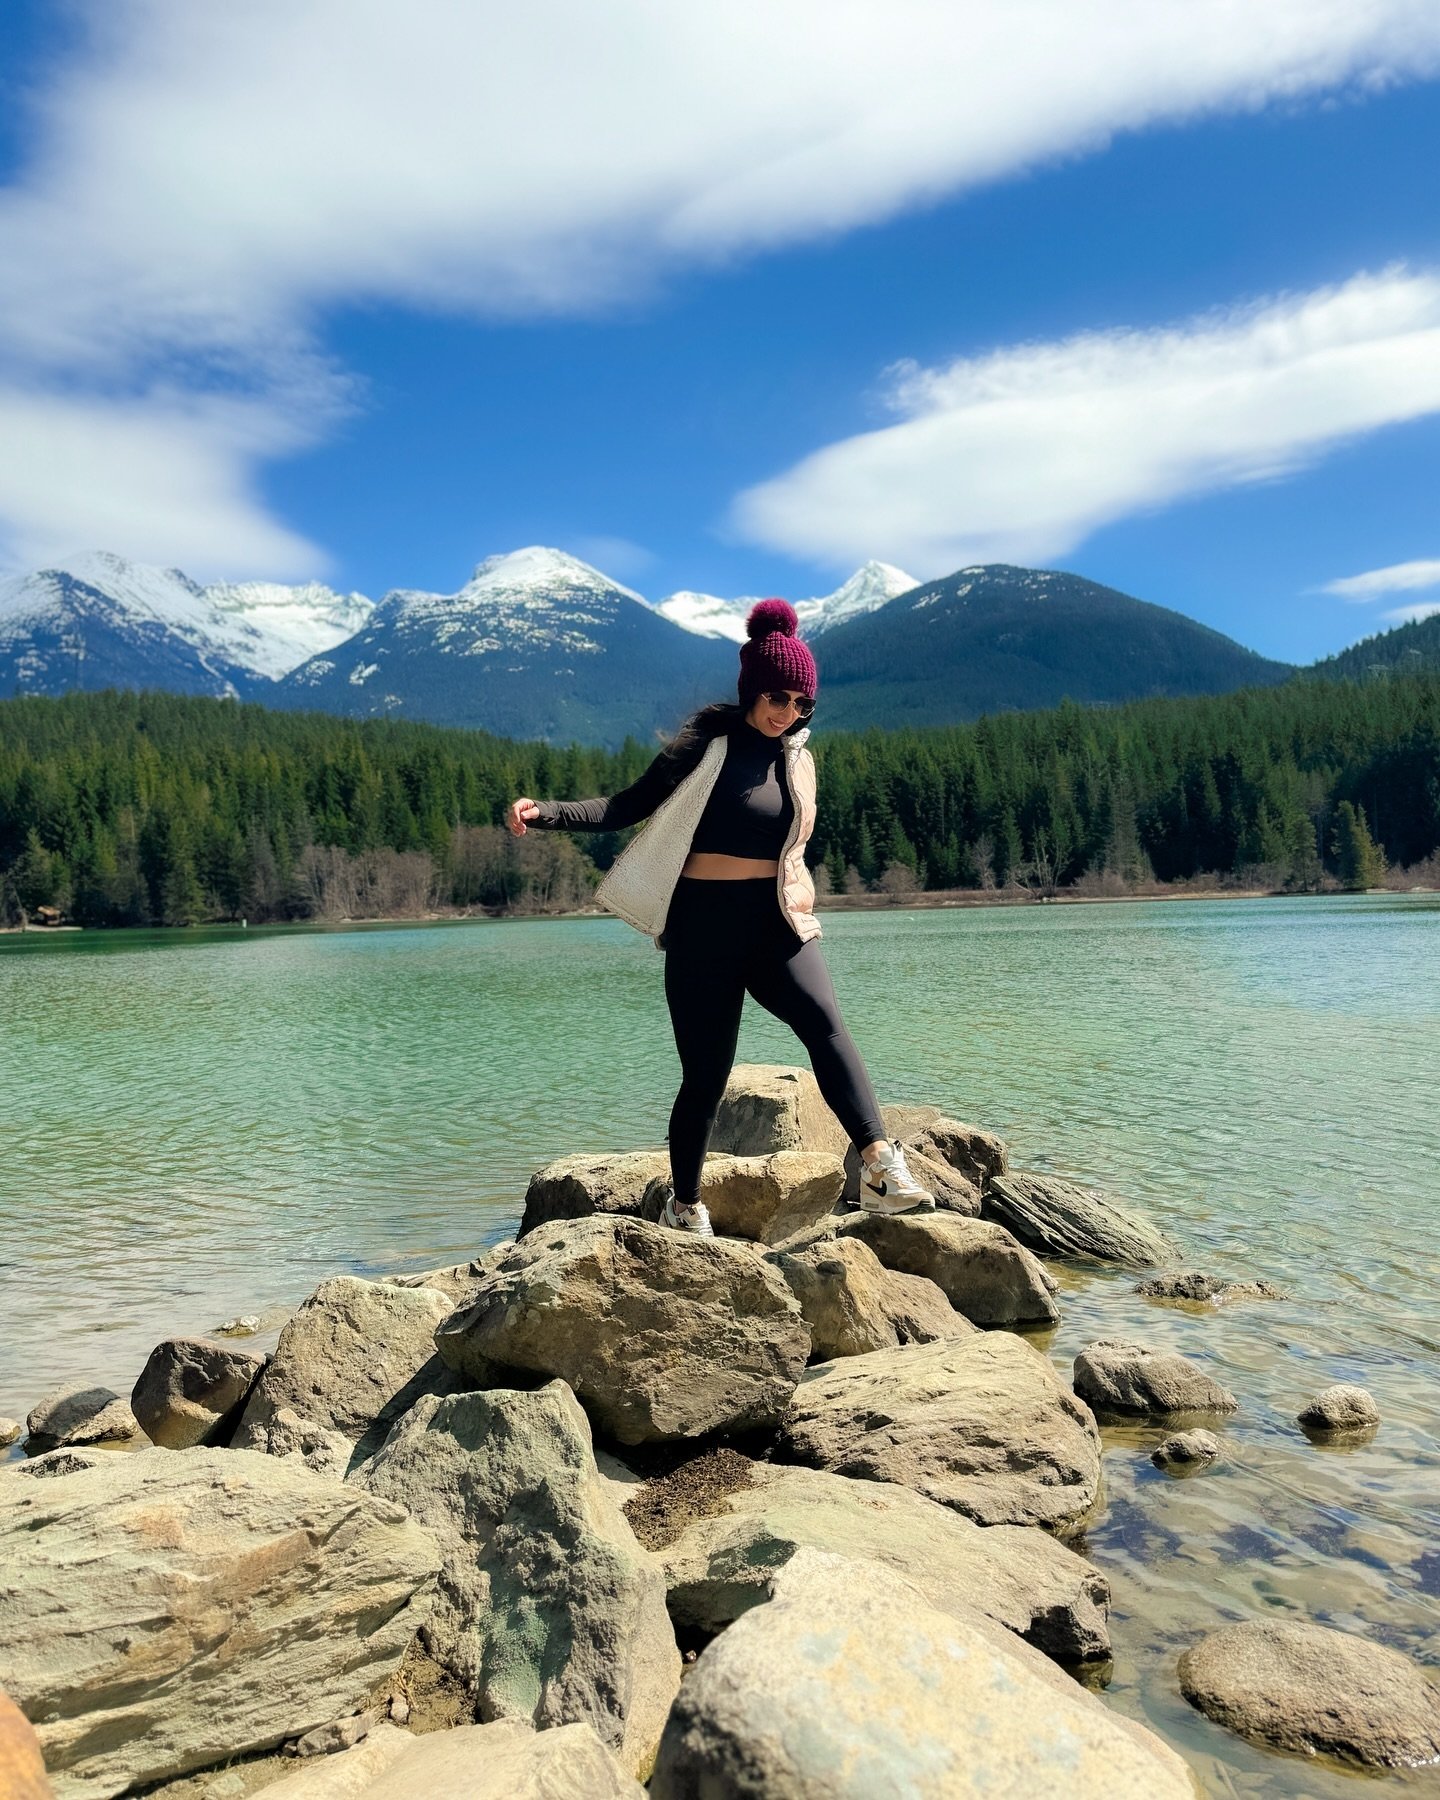 Happy Earth Day from Green Lake in Whistler, Canada 💚 Don&rsquo;t forget to&hellip; 

♻️ Reuse, compost and recycle. Make sure to read the packaging labels to recycle correctly. One recycling mistake can contaminate other materials.

♻️ Use eco-frie